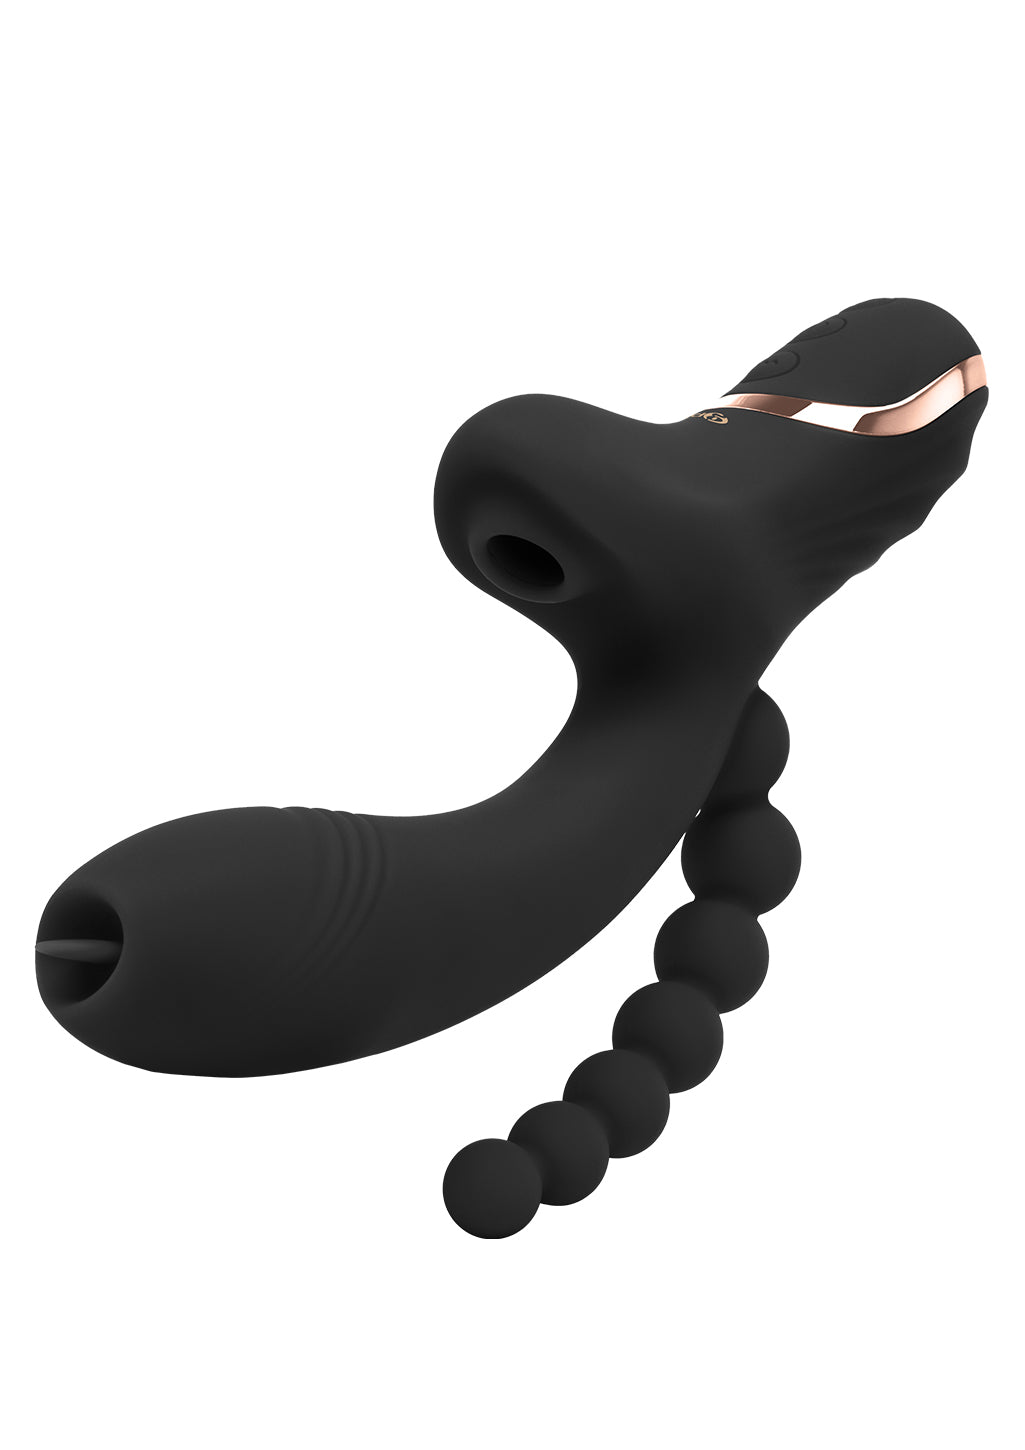 G-Play G-Spot and Clitoral Suction Vibe